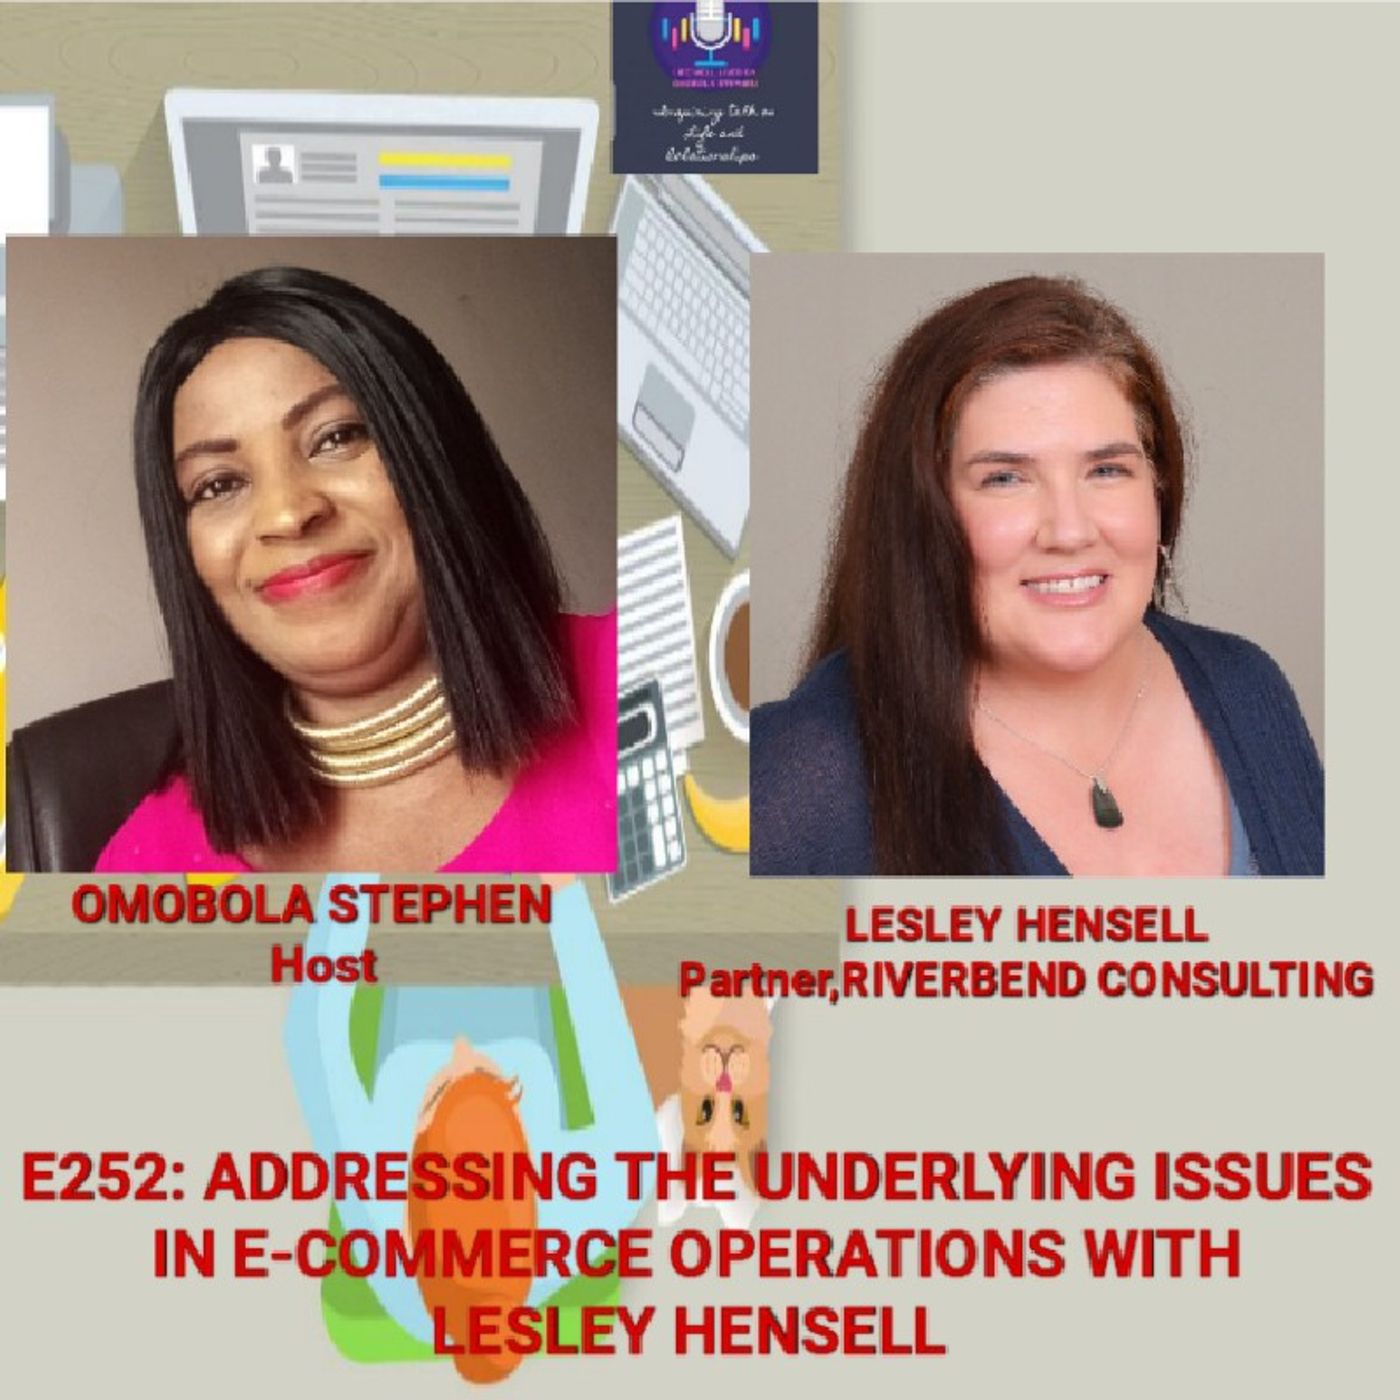 E252: Addressing The Underlying Business Issues In E-commerce Operations With Lesley Hensell